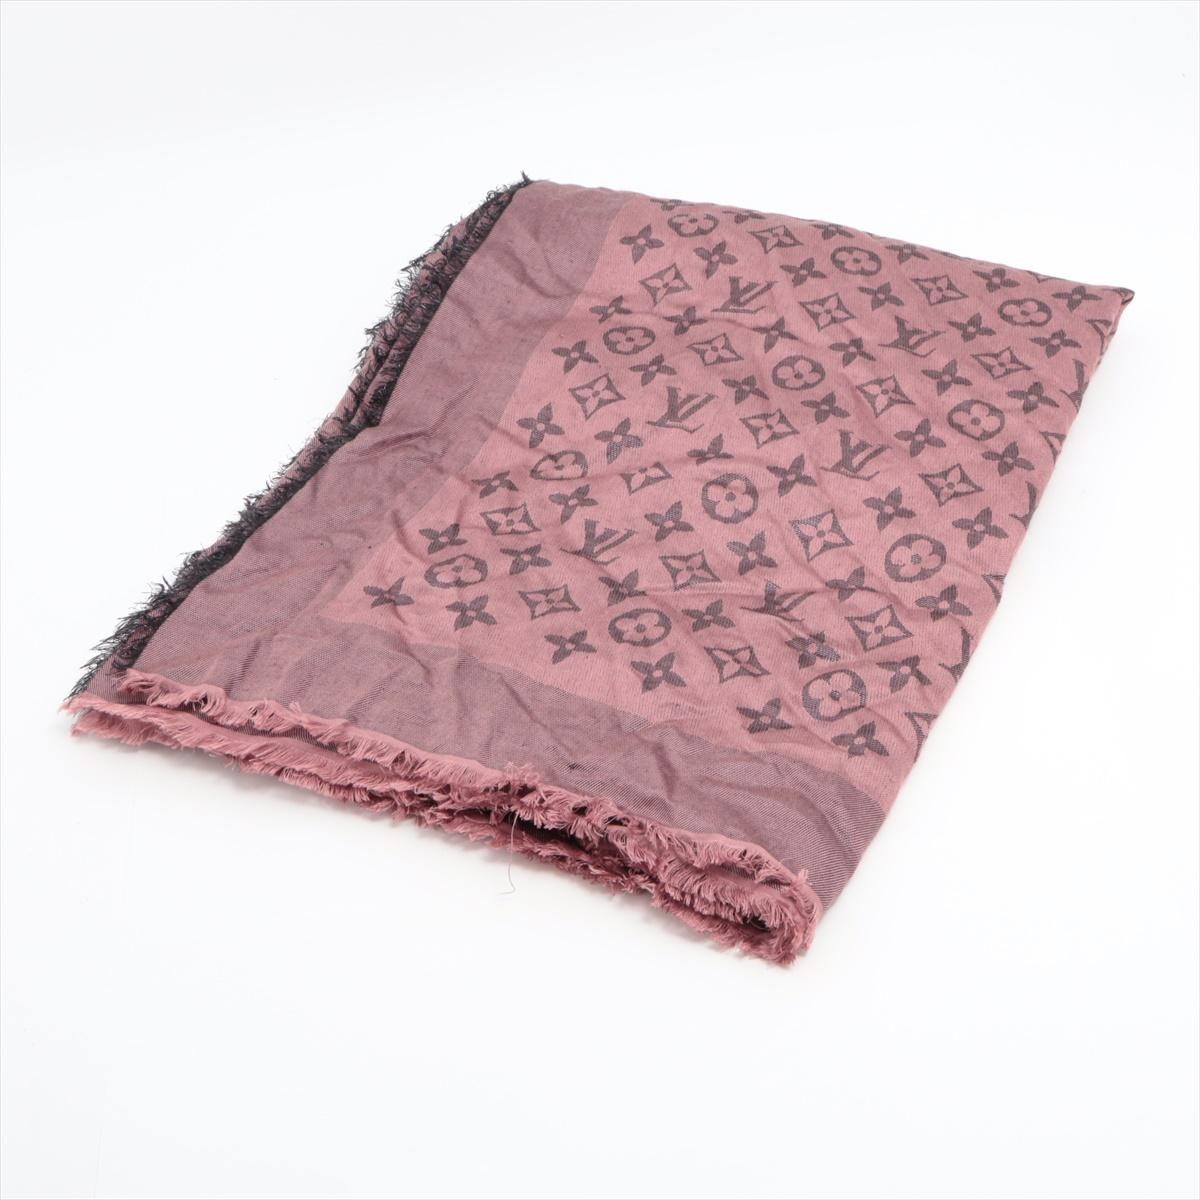 The Louis Vuitton So Shine Monogram Shawl in Purple is a luxurious and versatile accessory that adds a touch of elegance to any outfit. Crafted from a blend of silk and wool, the shawl features the iconic Louis Vuitton Monogram pattern in a vibrant